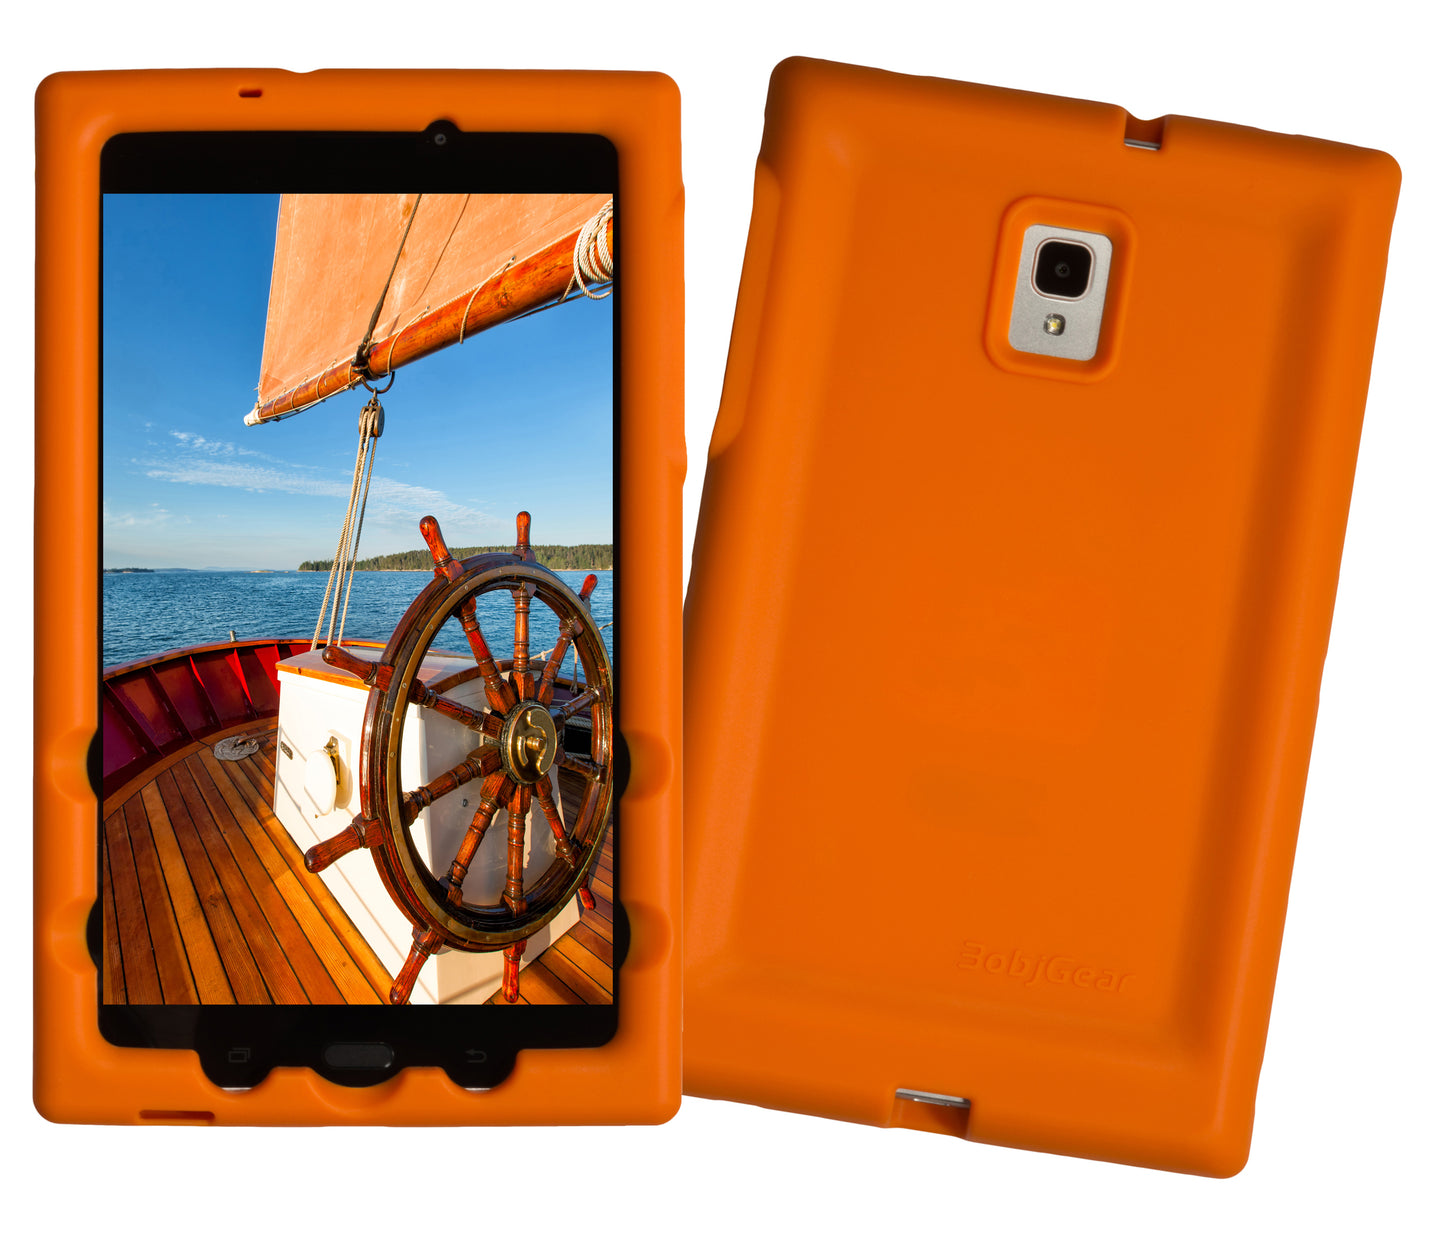 Bobj Rugged Tablet Case for Samsung Galaxy Tab A 8.0 (2017)  Model SM-T380 - Outrageous Orange